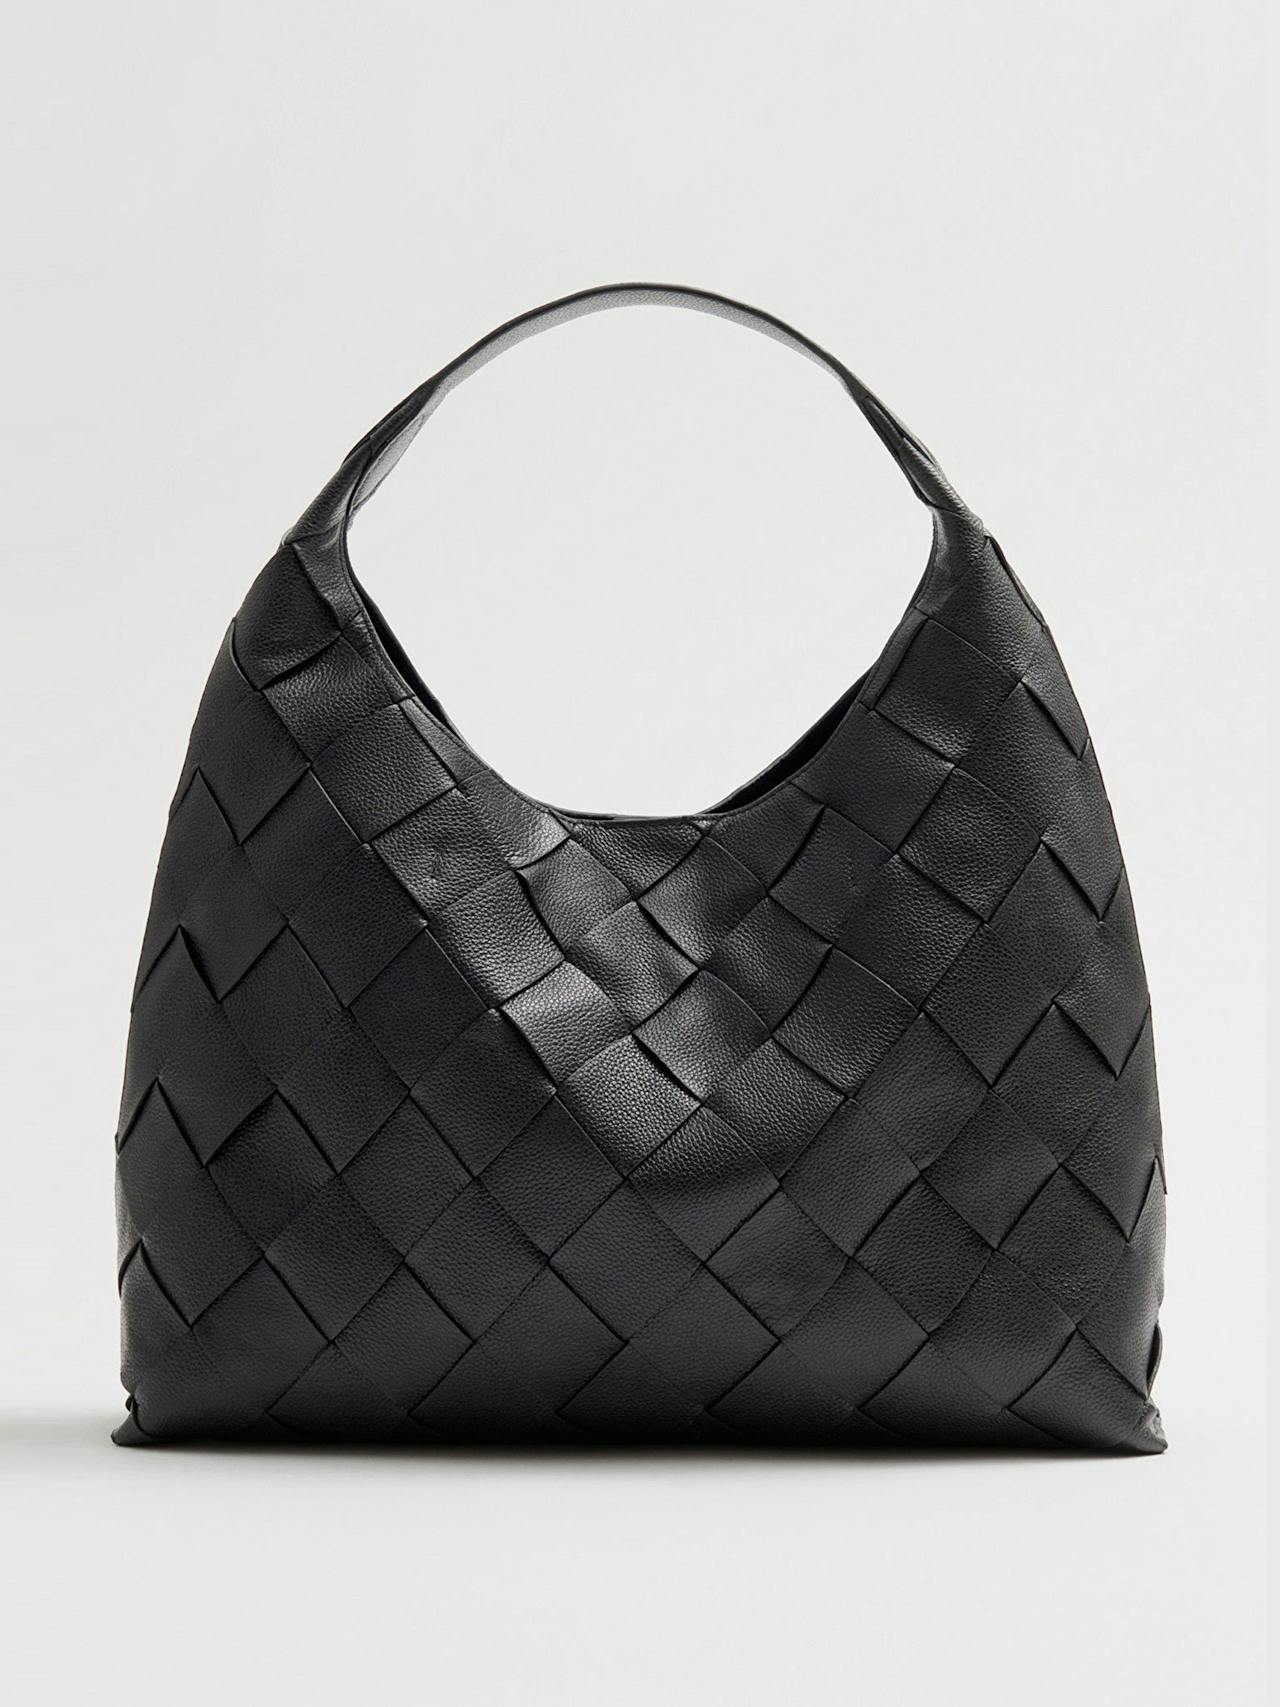 Black braided leather tote bag